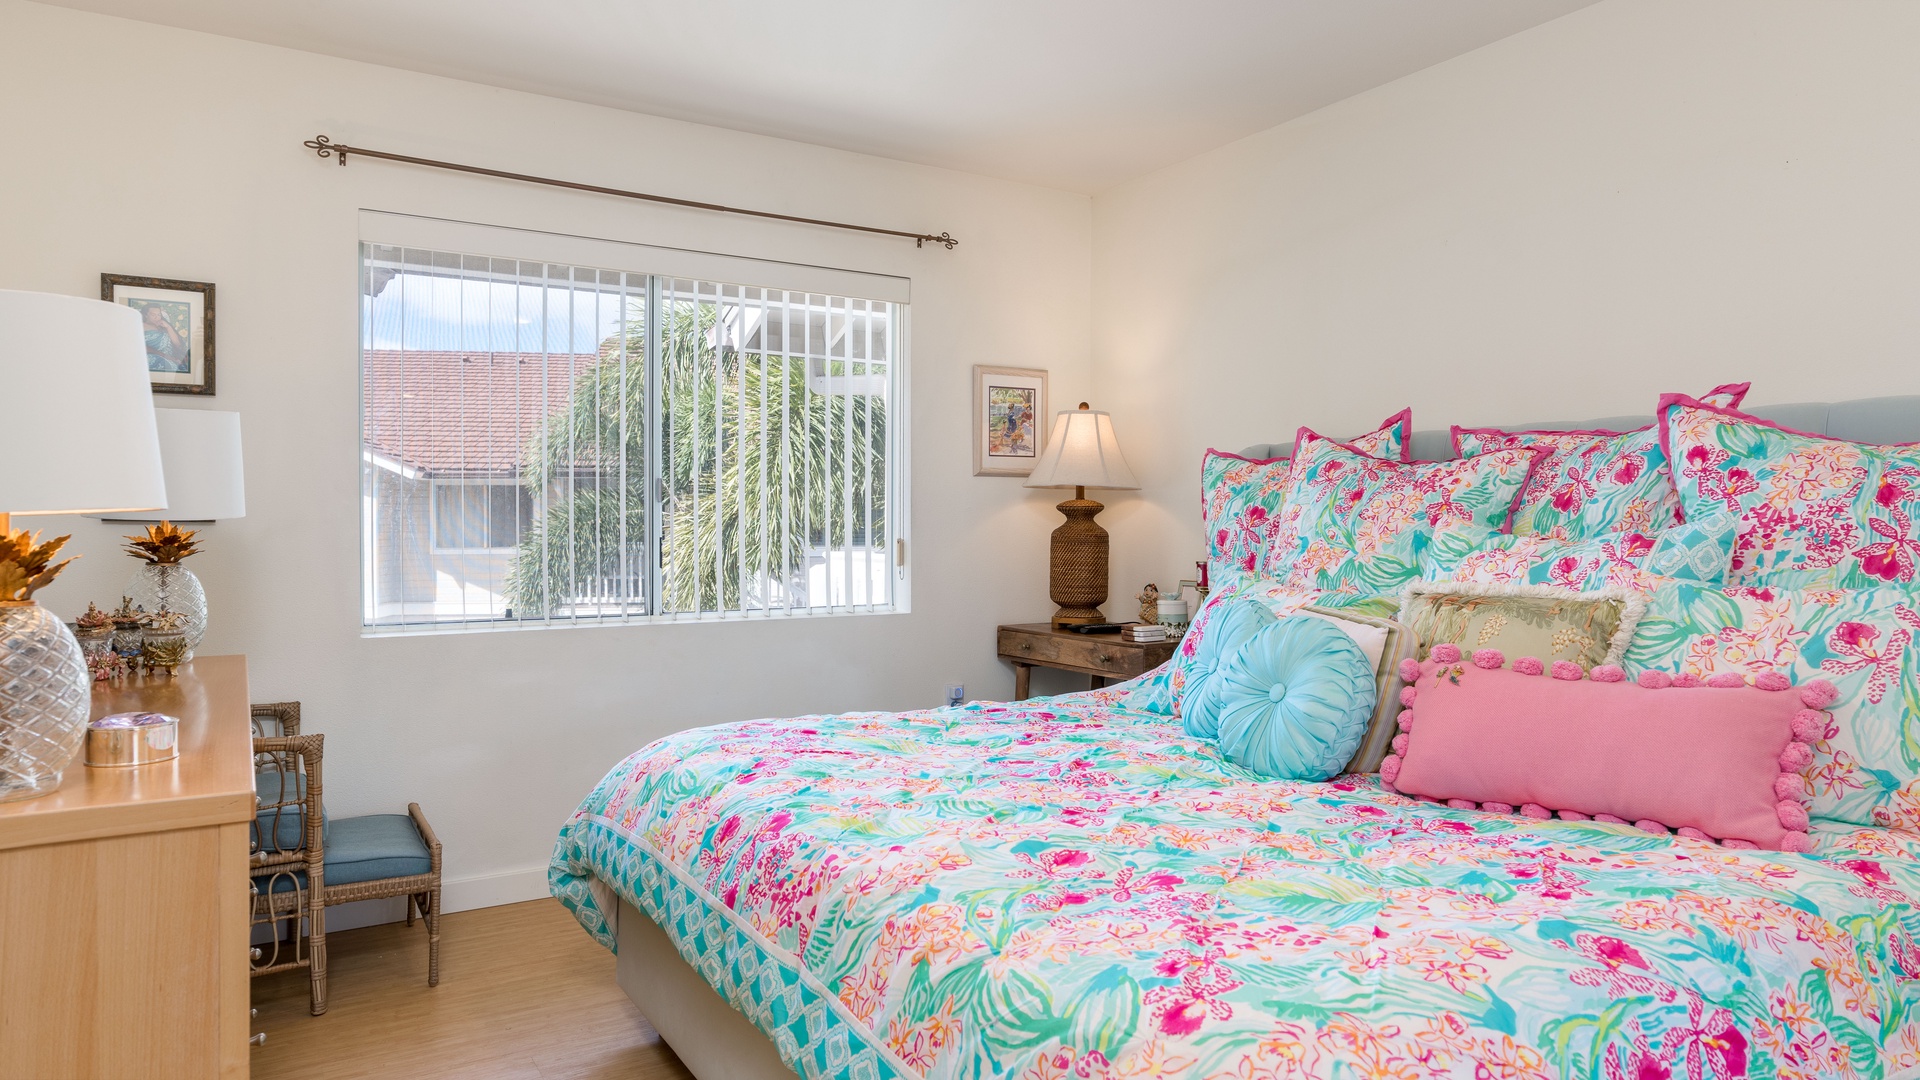 Kapolei Vacation Rentals, Fairways at Ko Olina 4A - The primary guest bedroom is comfortable and spacious for a restful slumber.